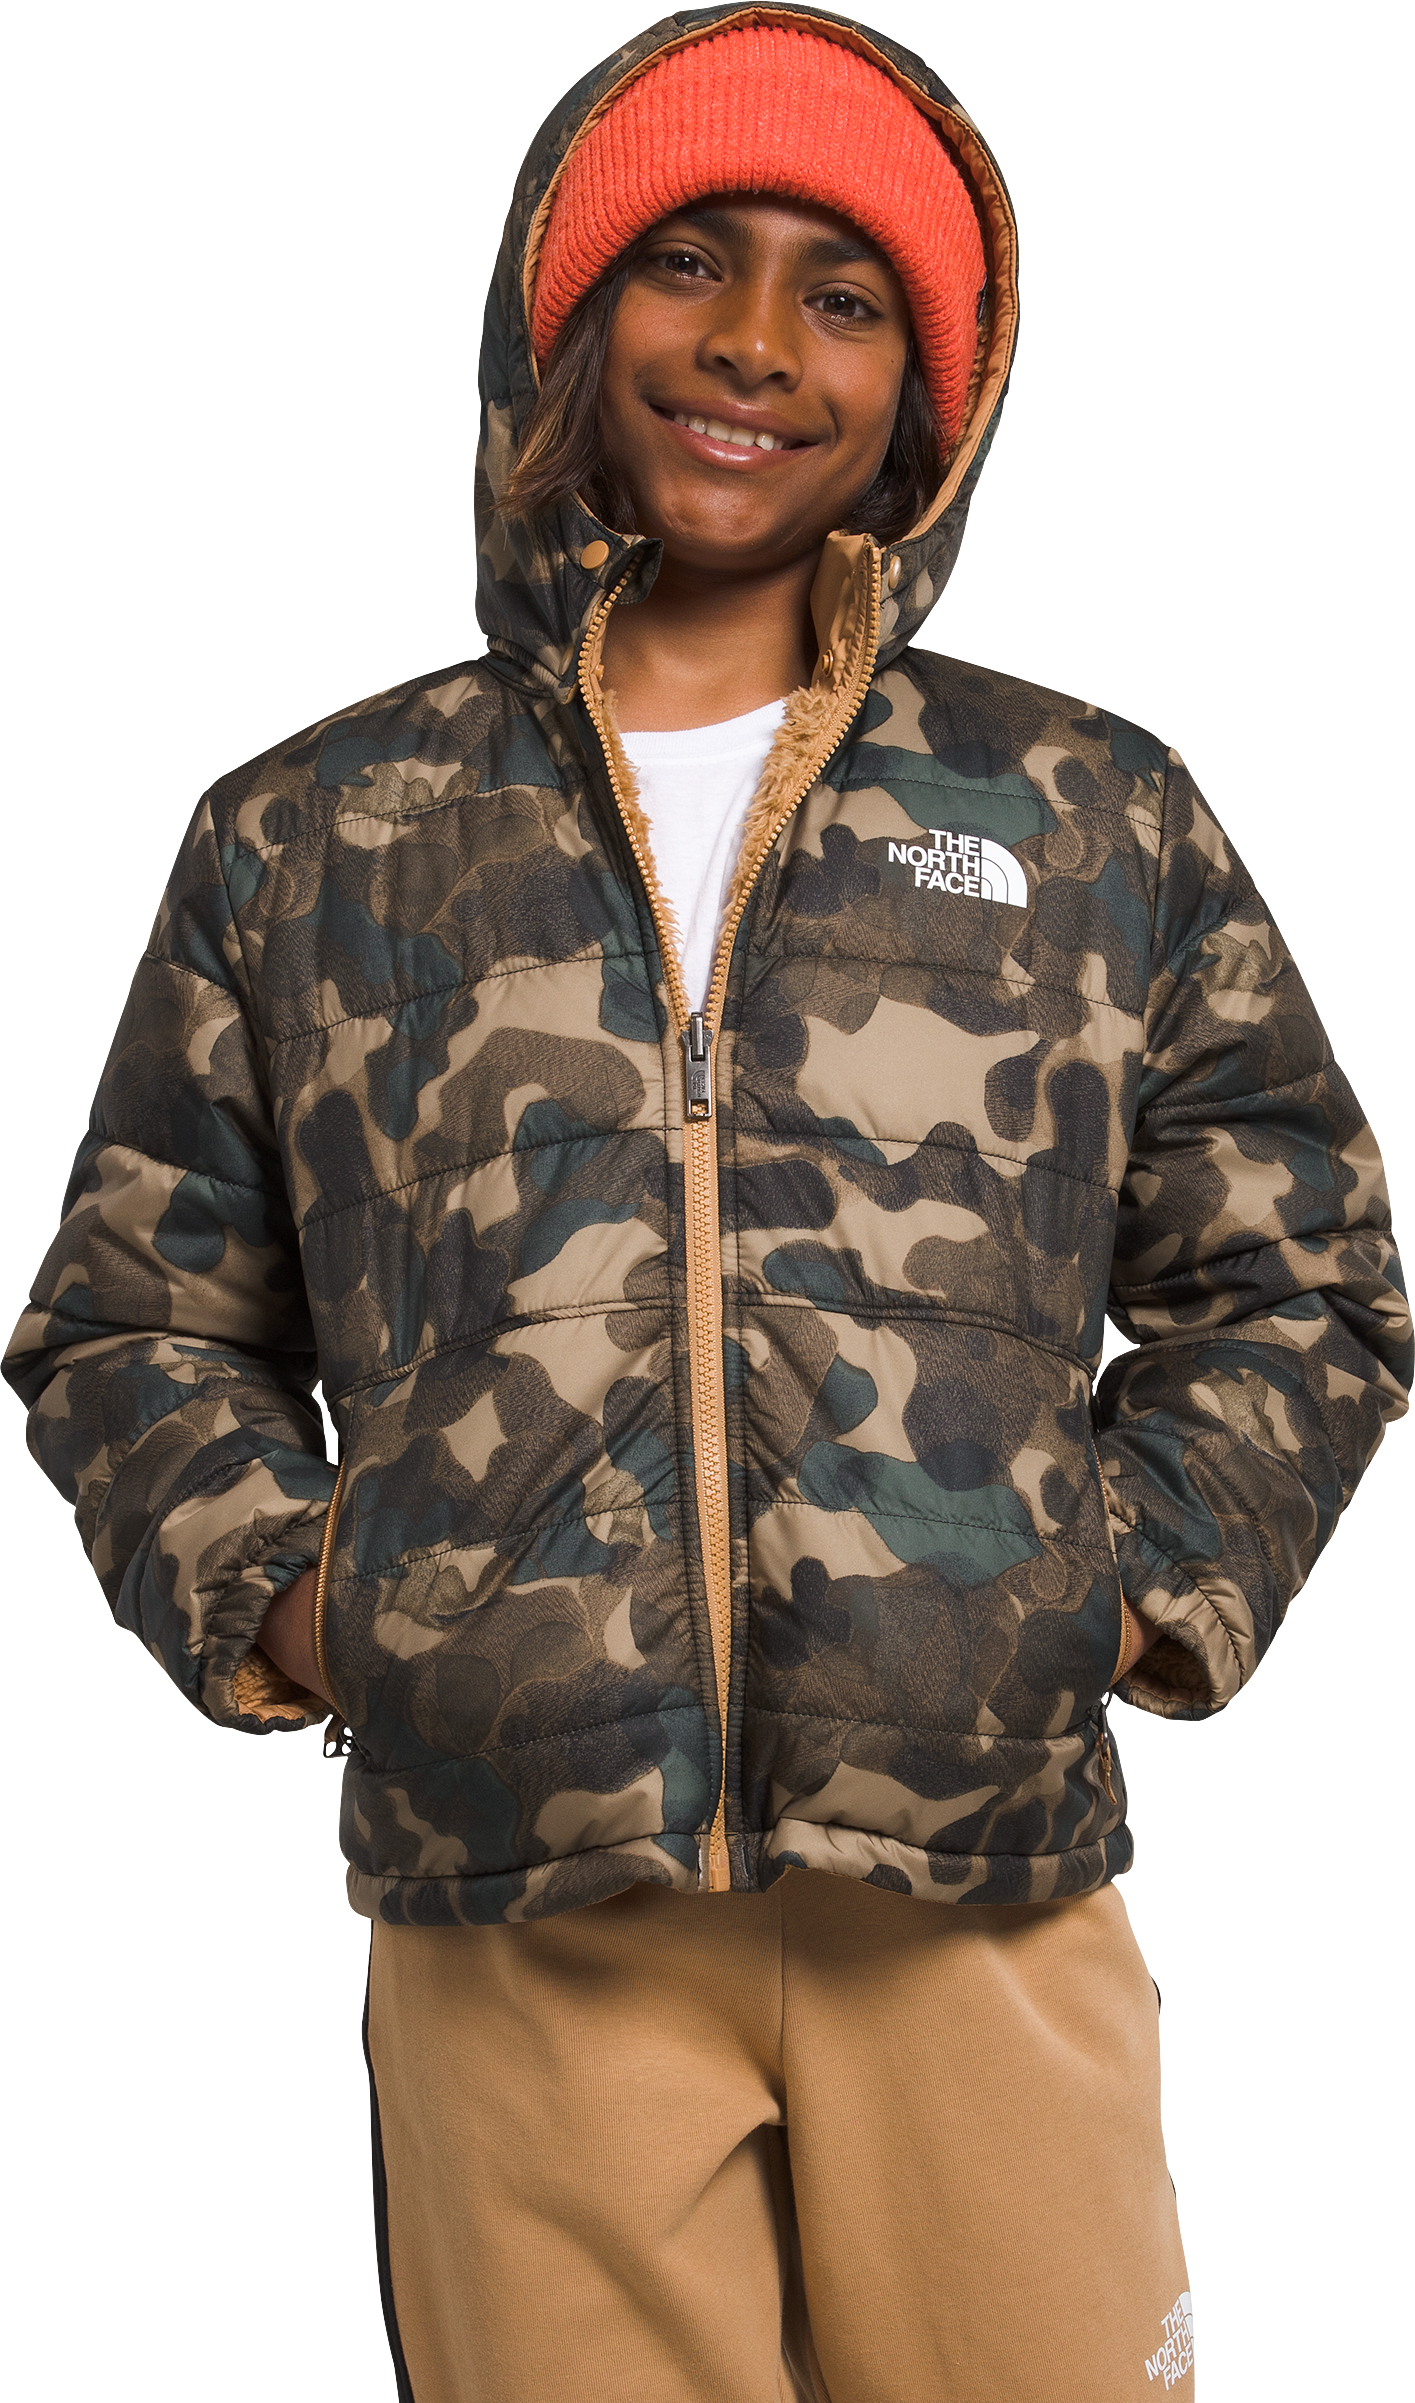 The North Face Reversible Mount Chimbo Full-Zip Hooded Jacket for Boys